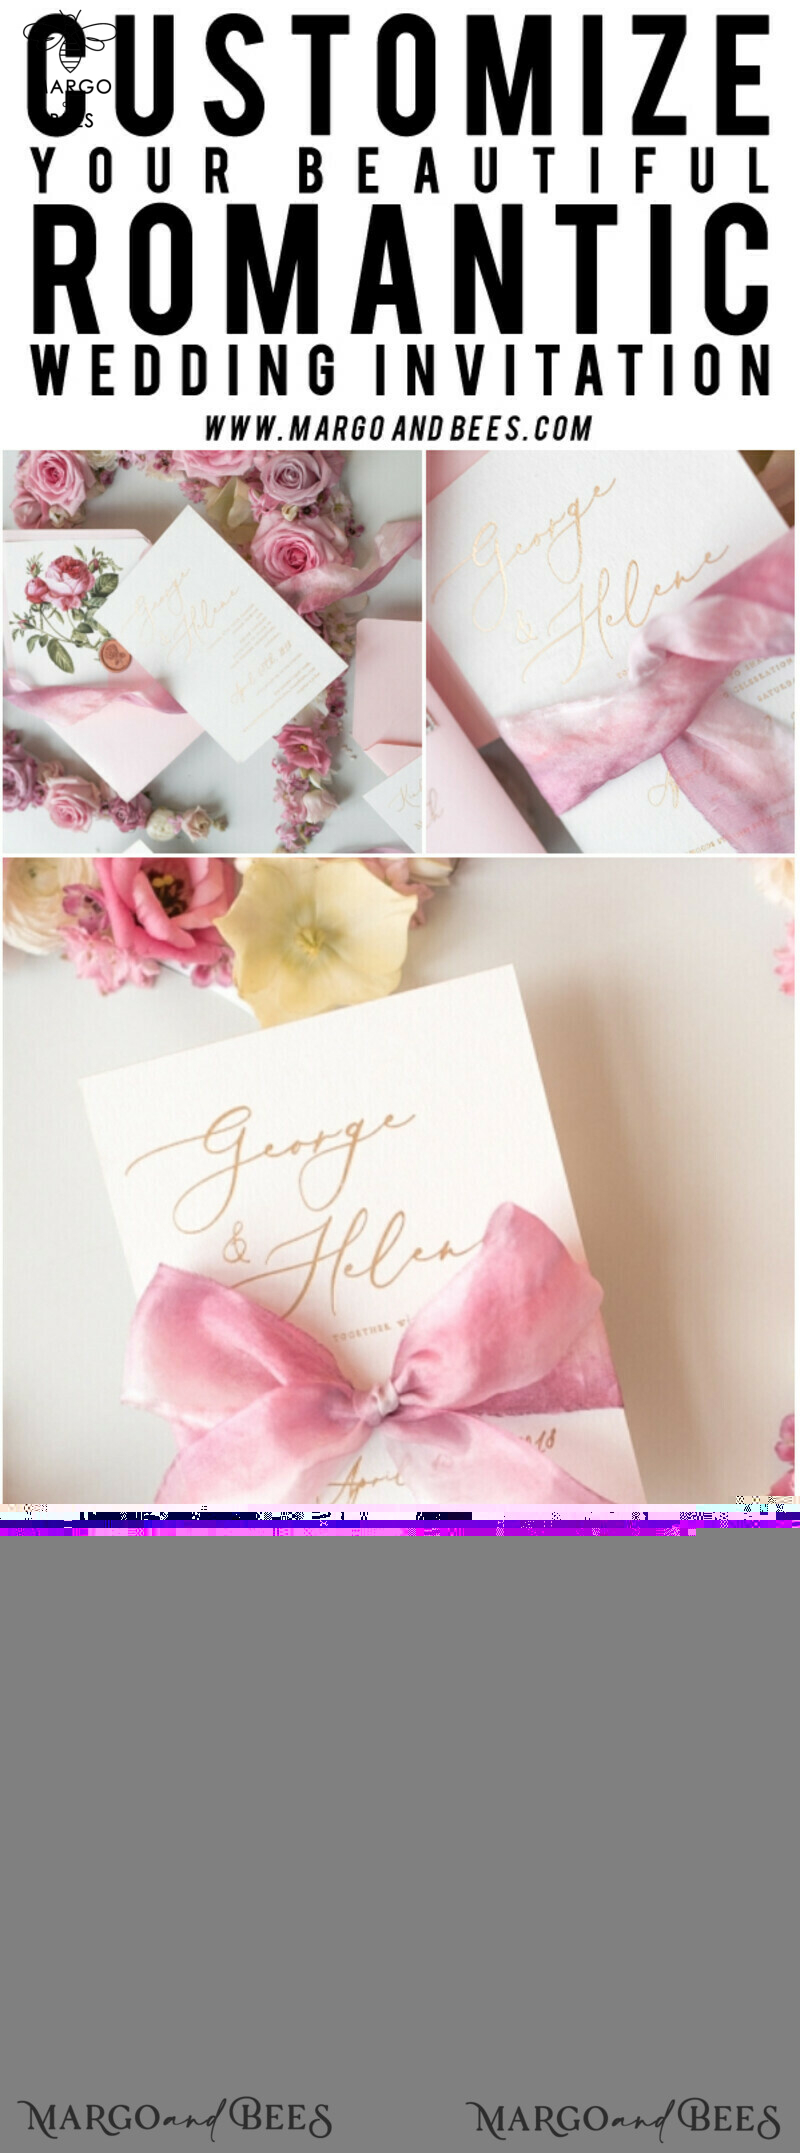 Elegant Personalized Wedding Invitations Romantic Stationery with Vintage Garden Roses and  Handmade Silk Bow Gold Foil Letters  Blush Pink Envelope -47